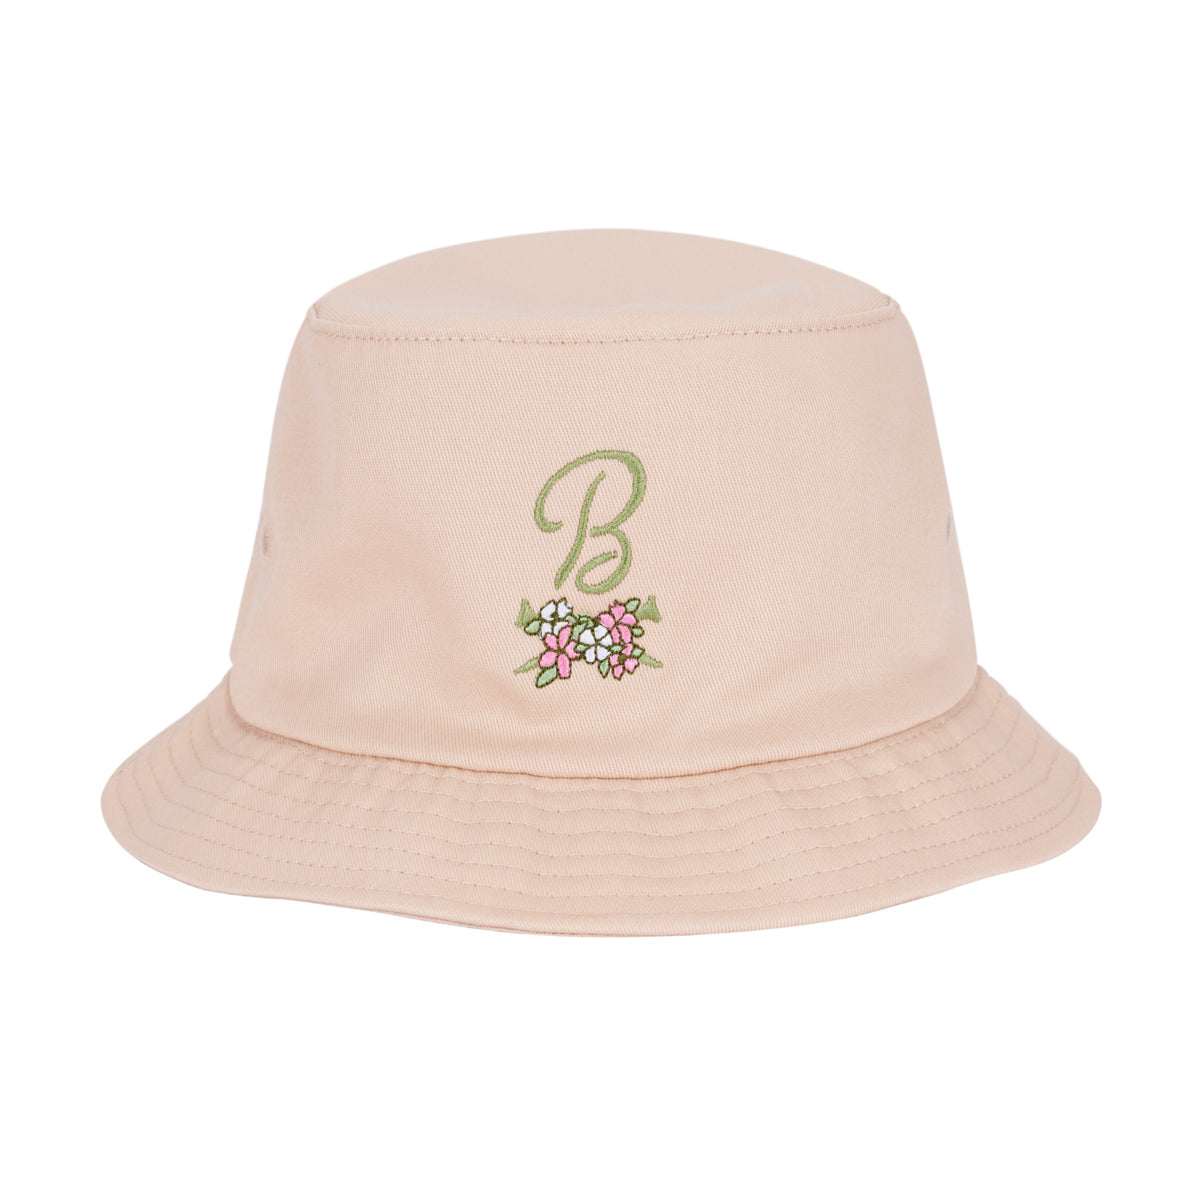 Barstool Golf Flower Crossed Tees Bucket Hat-Hats-Fore Play-Cream-One Size-Barstool Sports